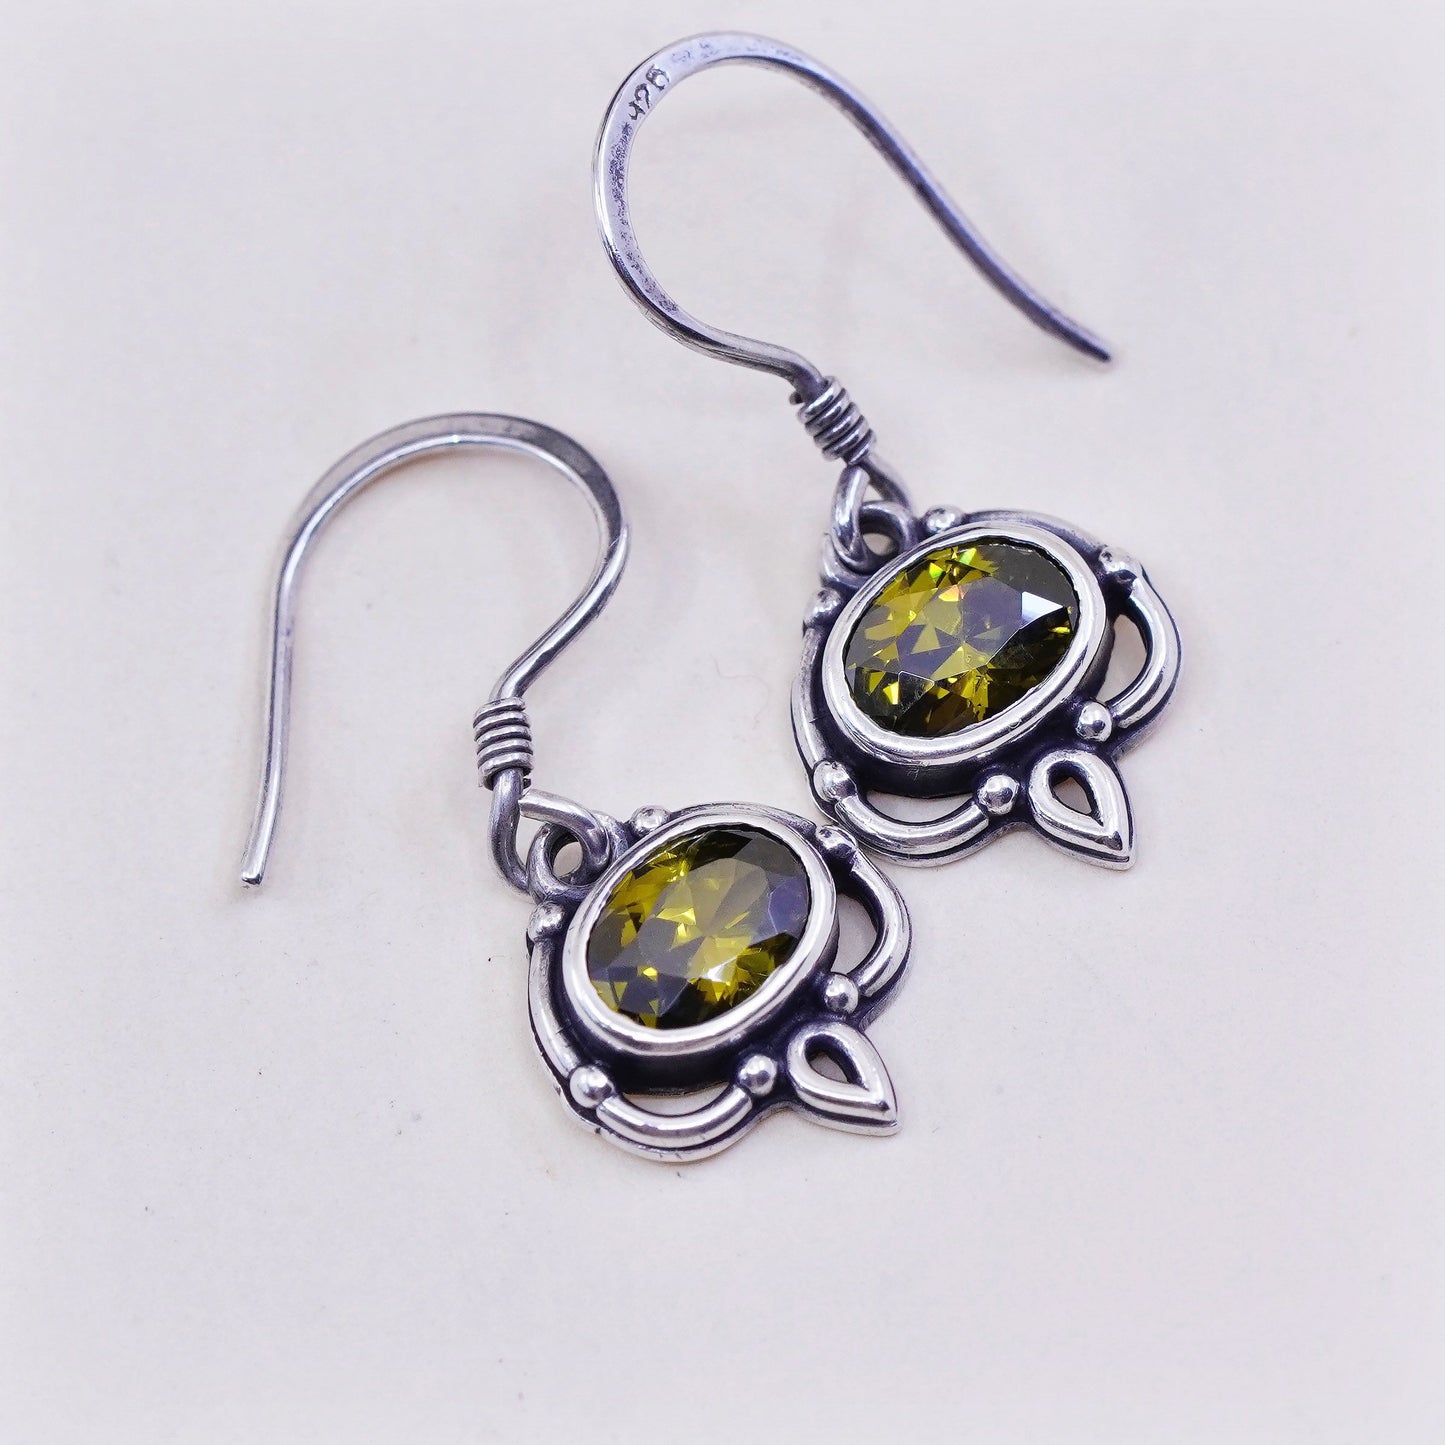 Vintage handmade sterling 925 silver olive green crystal earrings with beads